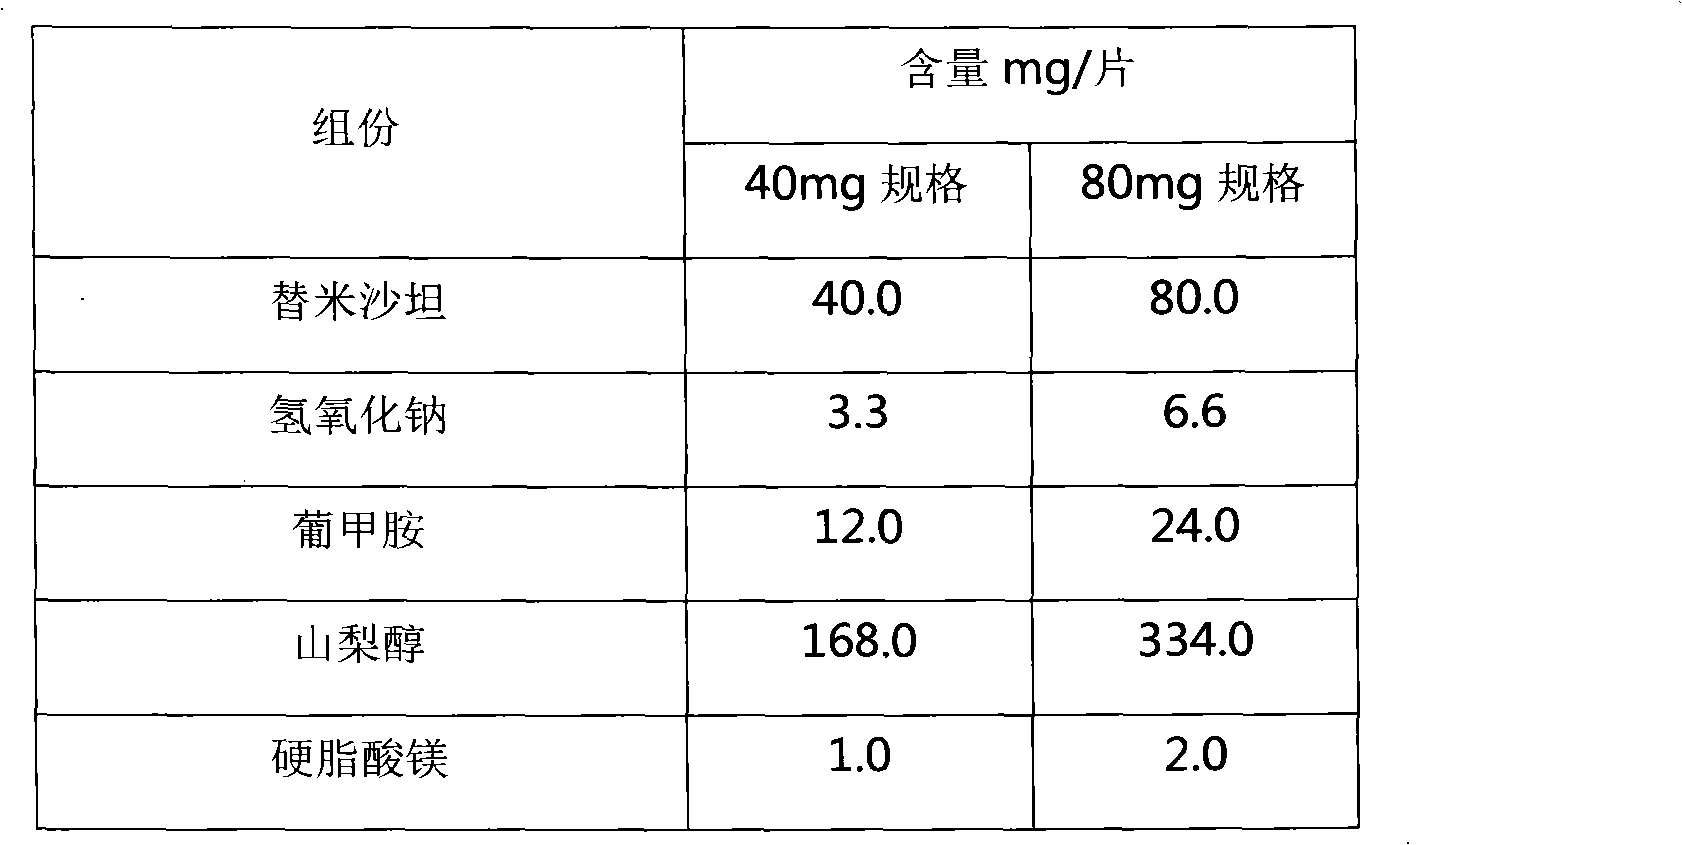 Preparation method for coating tablets containing telmisartan and amlodipine